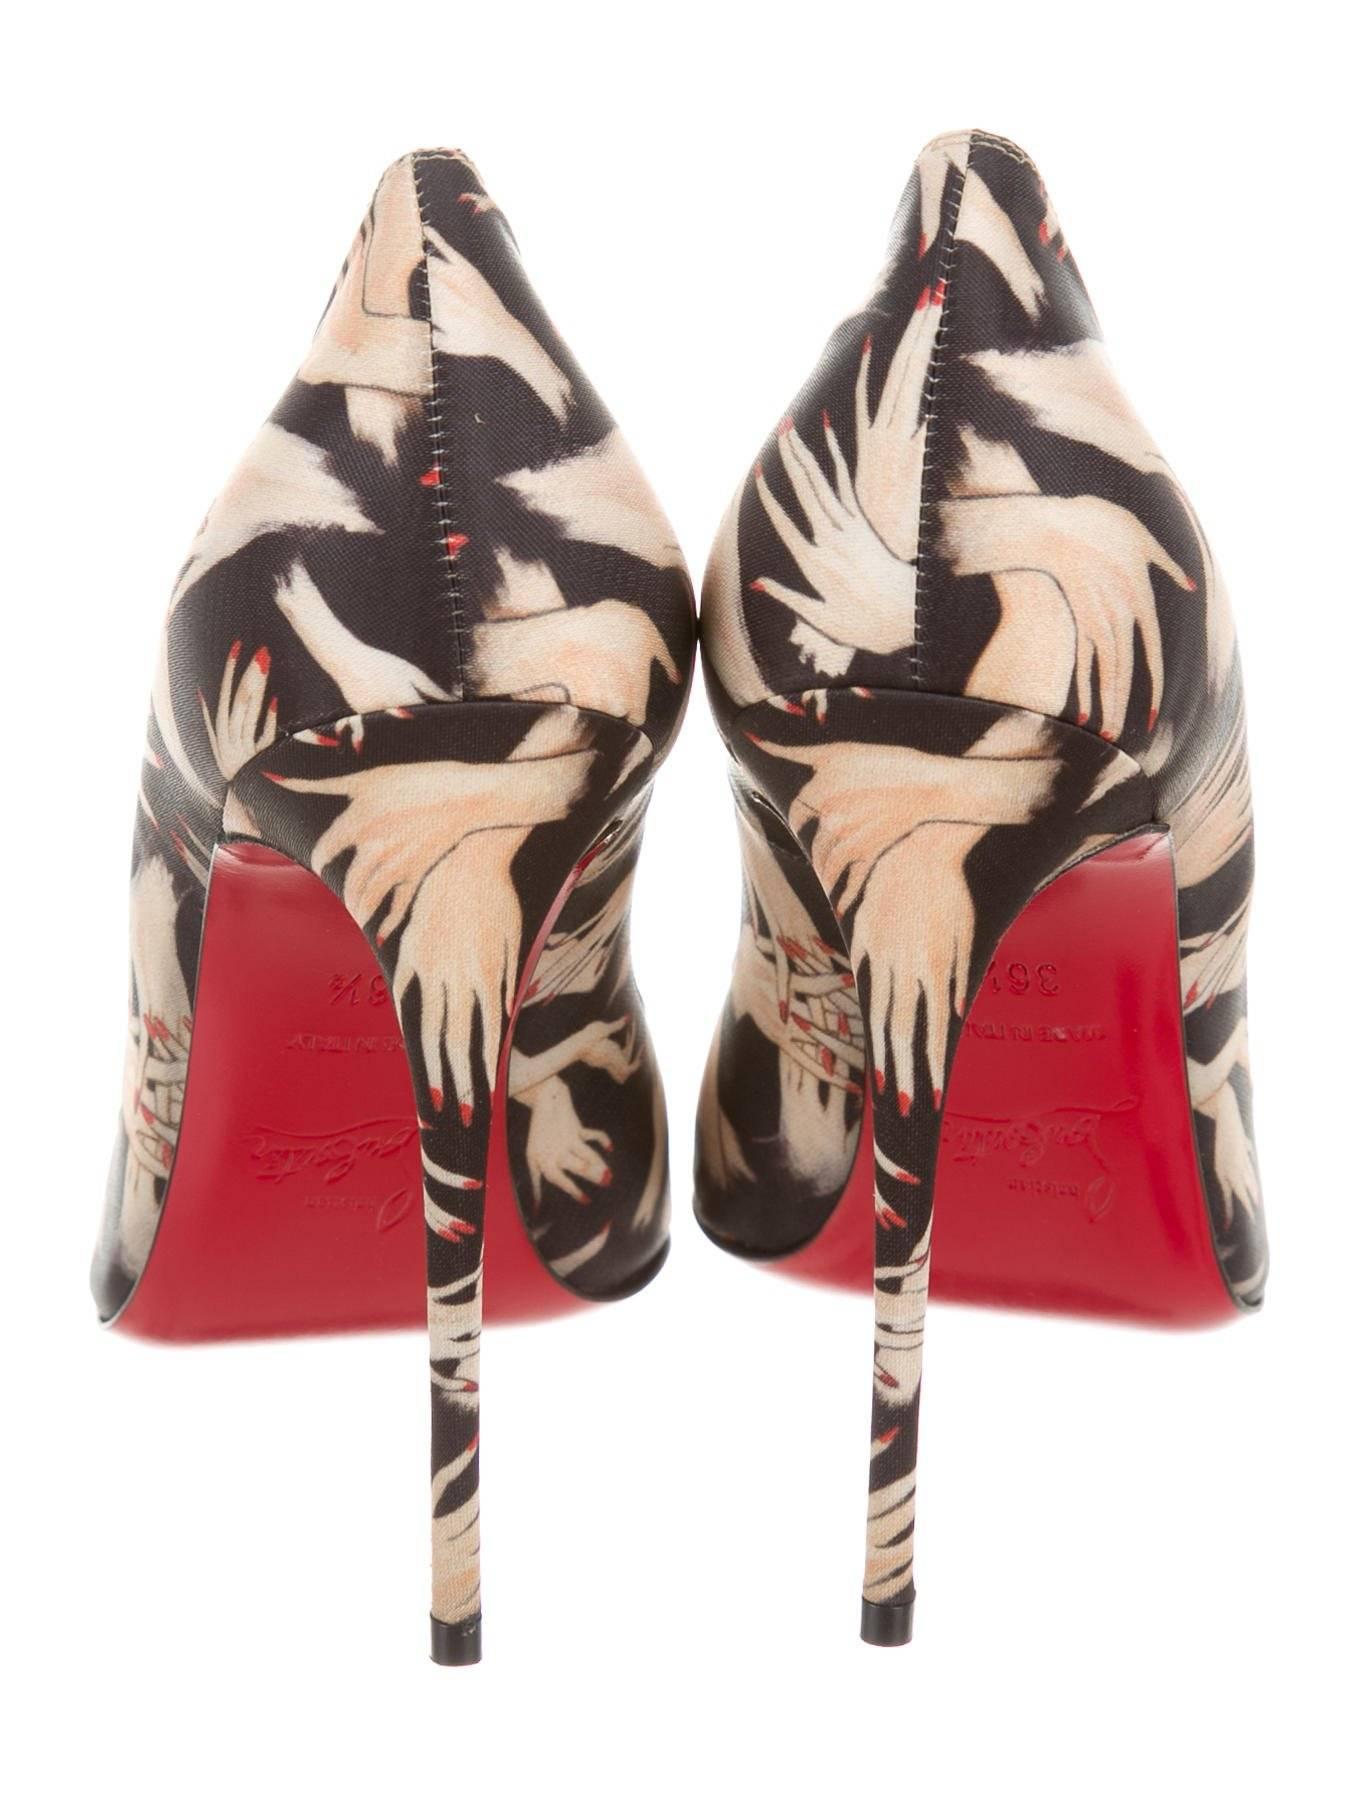 christian louboutin limited edition heels